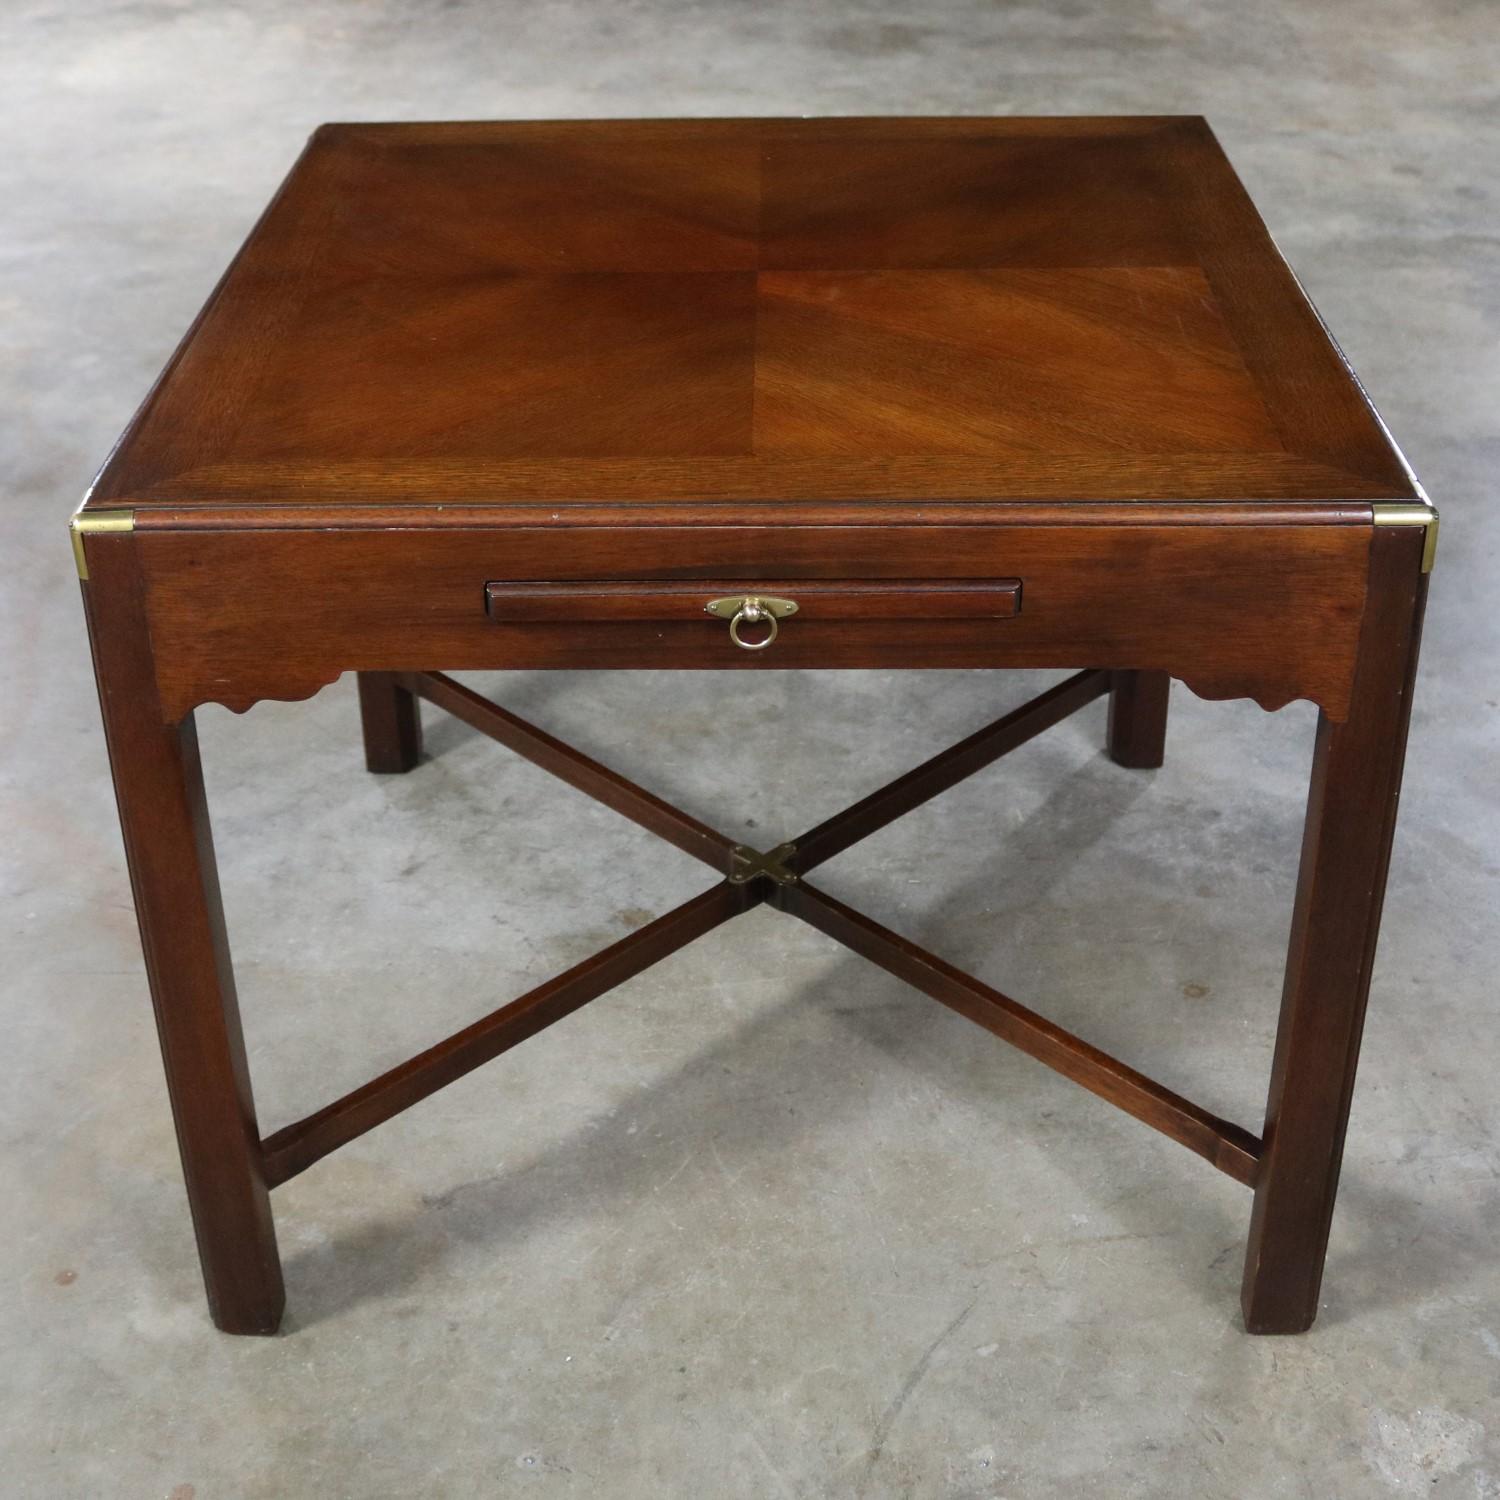 Handsome vintage mahogany Campaign style square side table or end table with a pull-out shelf or tray and beautiful brass accents. This table is in excellent vintage condition, circa midcentury to late 20th century.

This exceptionally beautiful